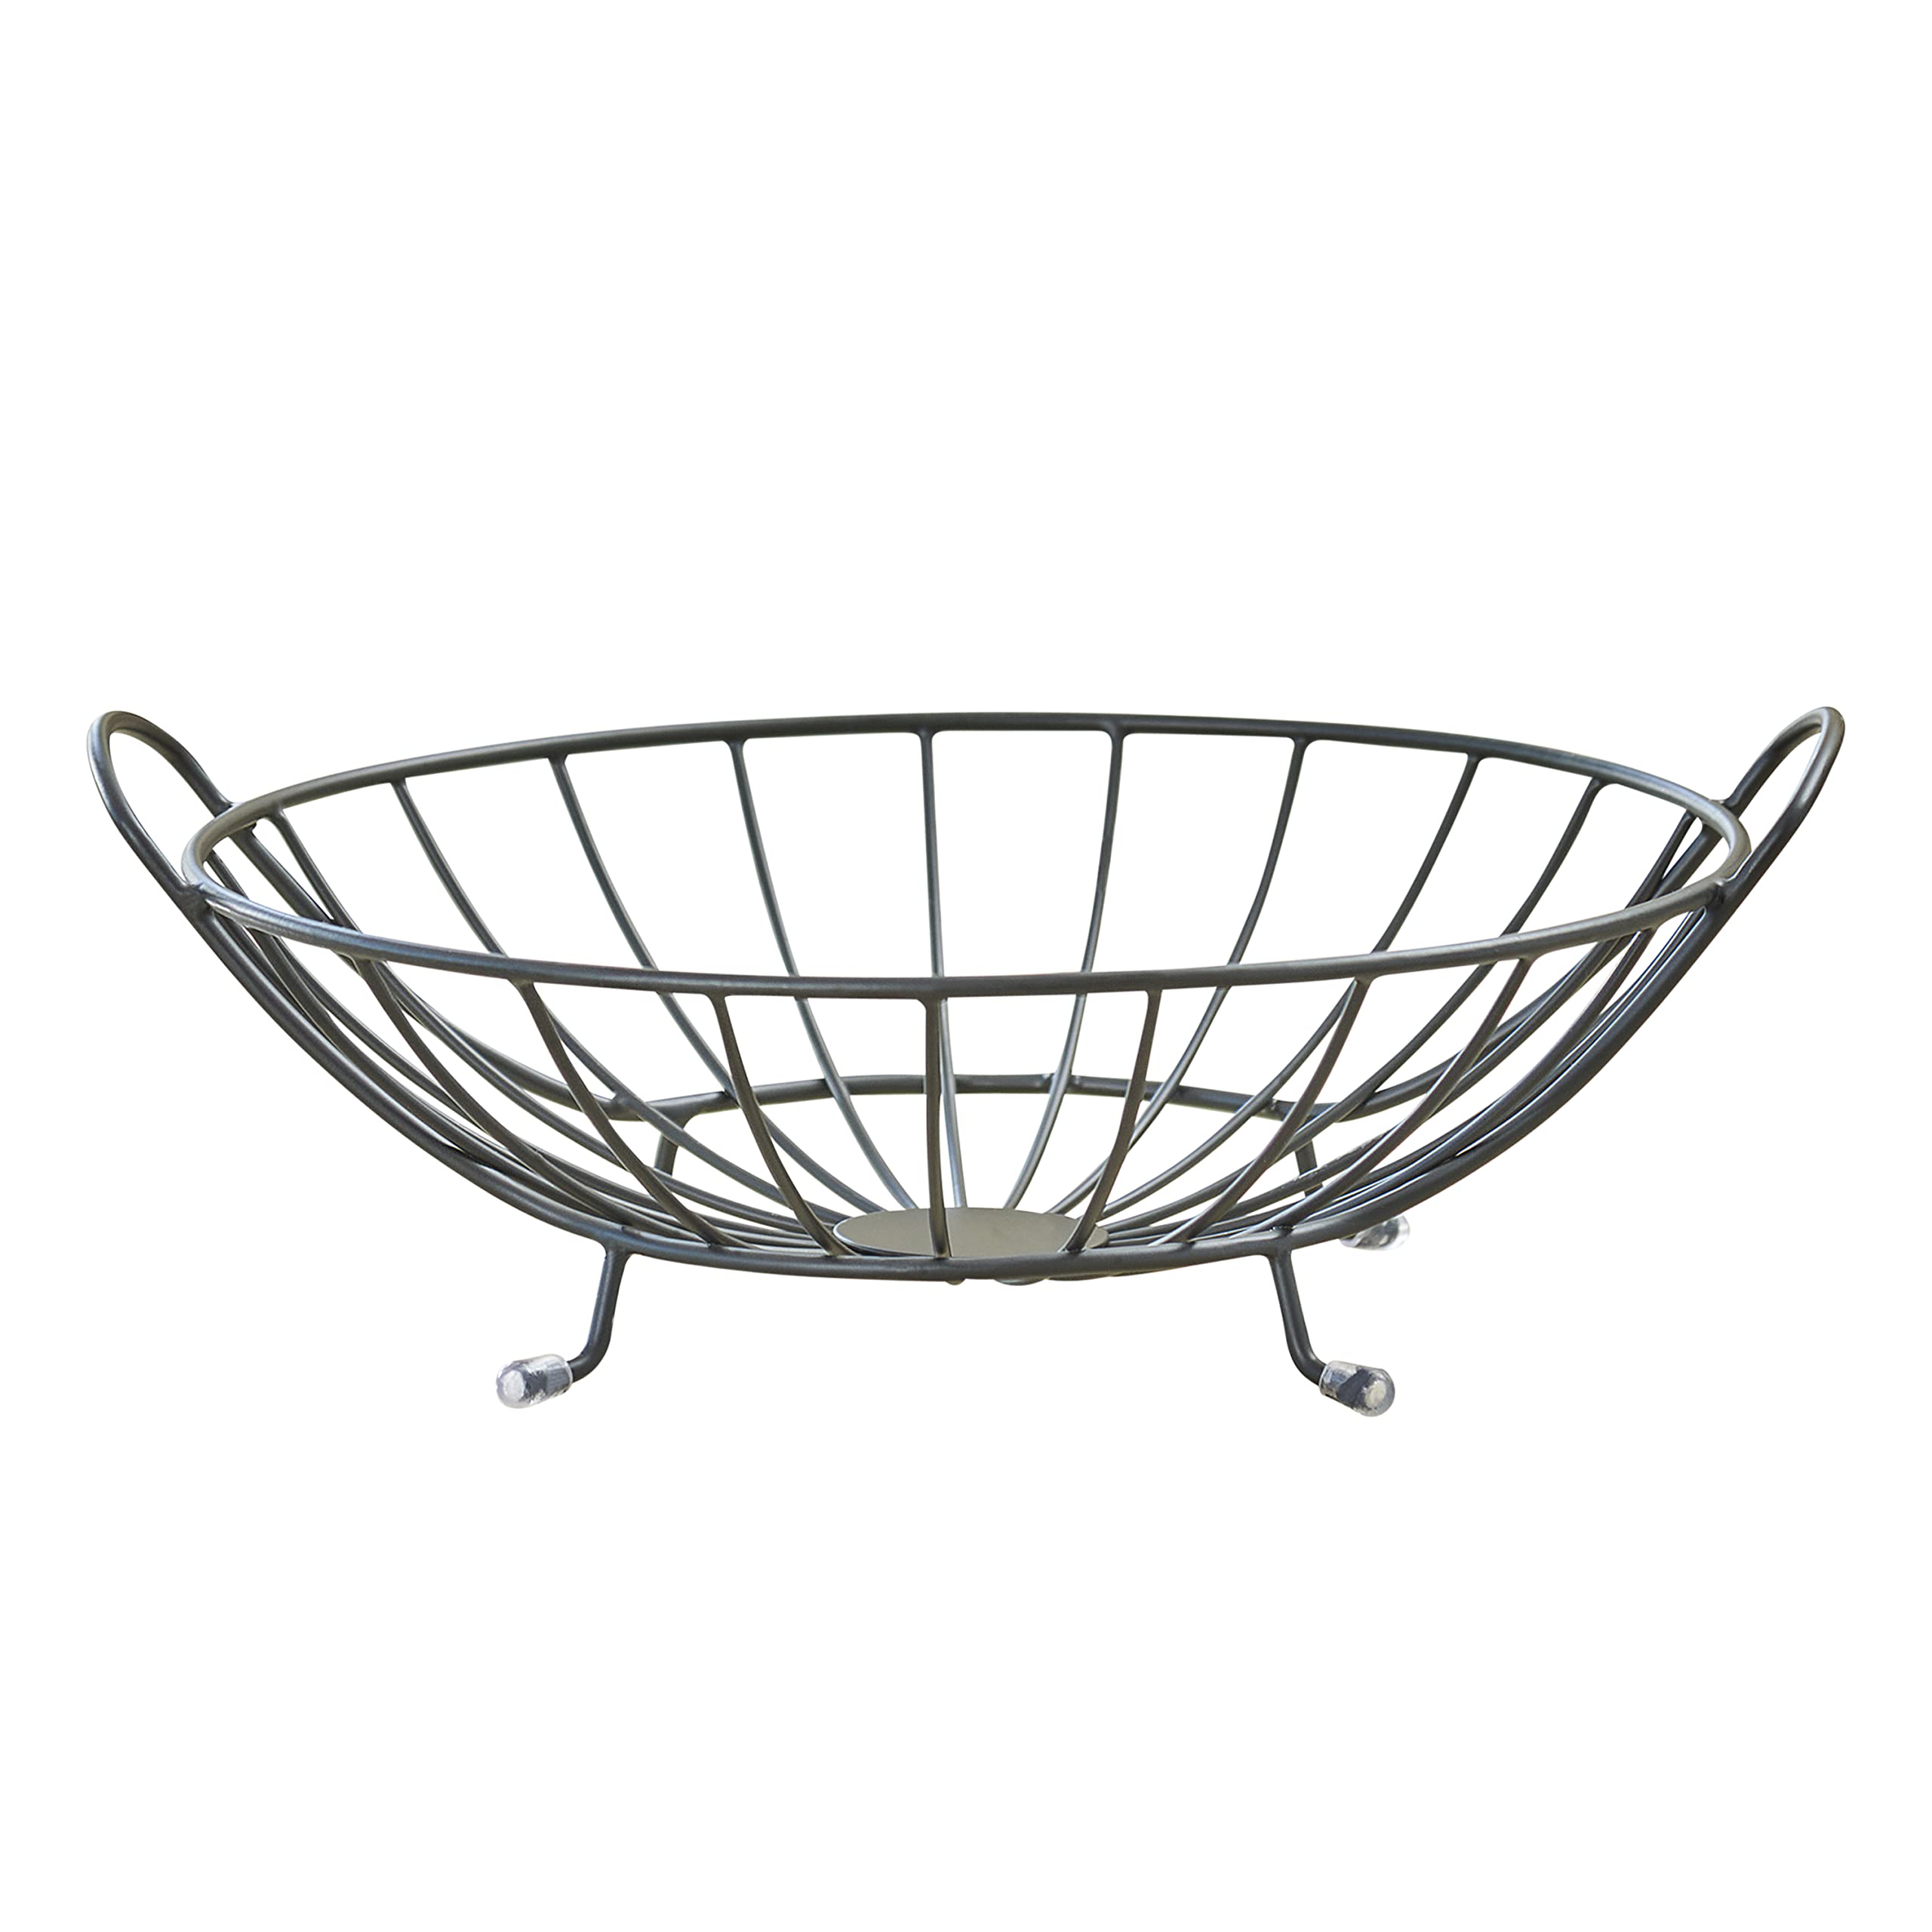 Spectrum Yumi Arched Fruit Bowl Server (Black) | Dining Table & Kitchen Counter Organizer, Modern Fruit Basket Stand | Yumi Collection